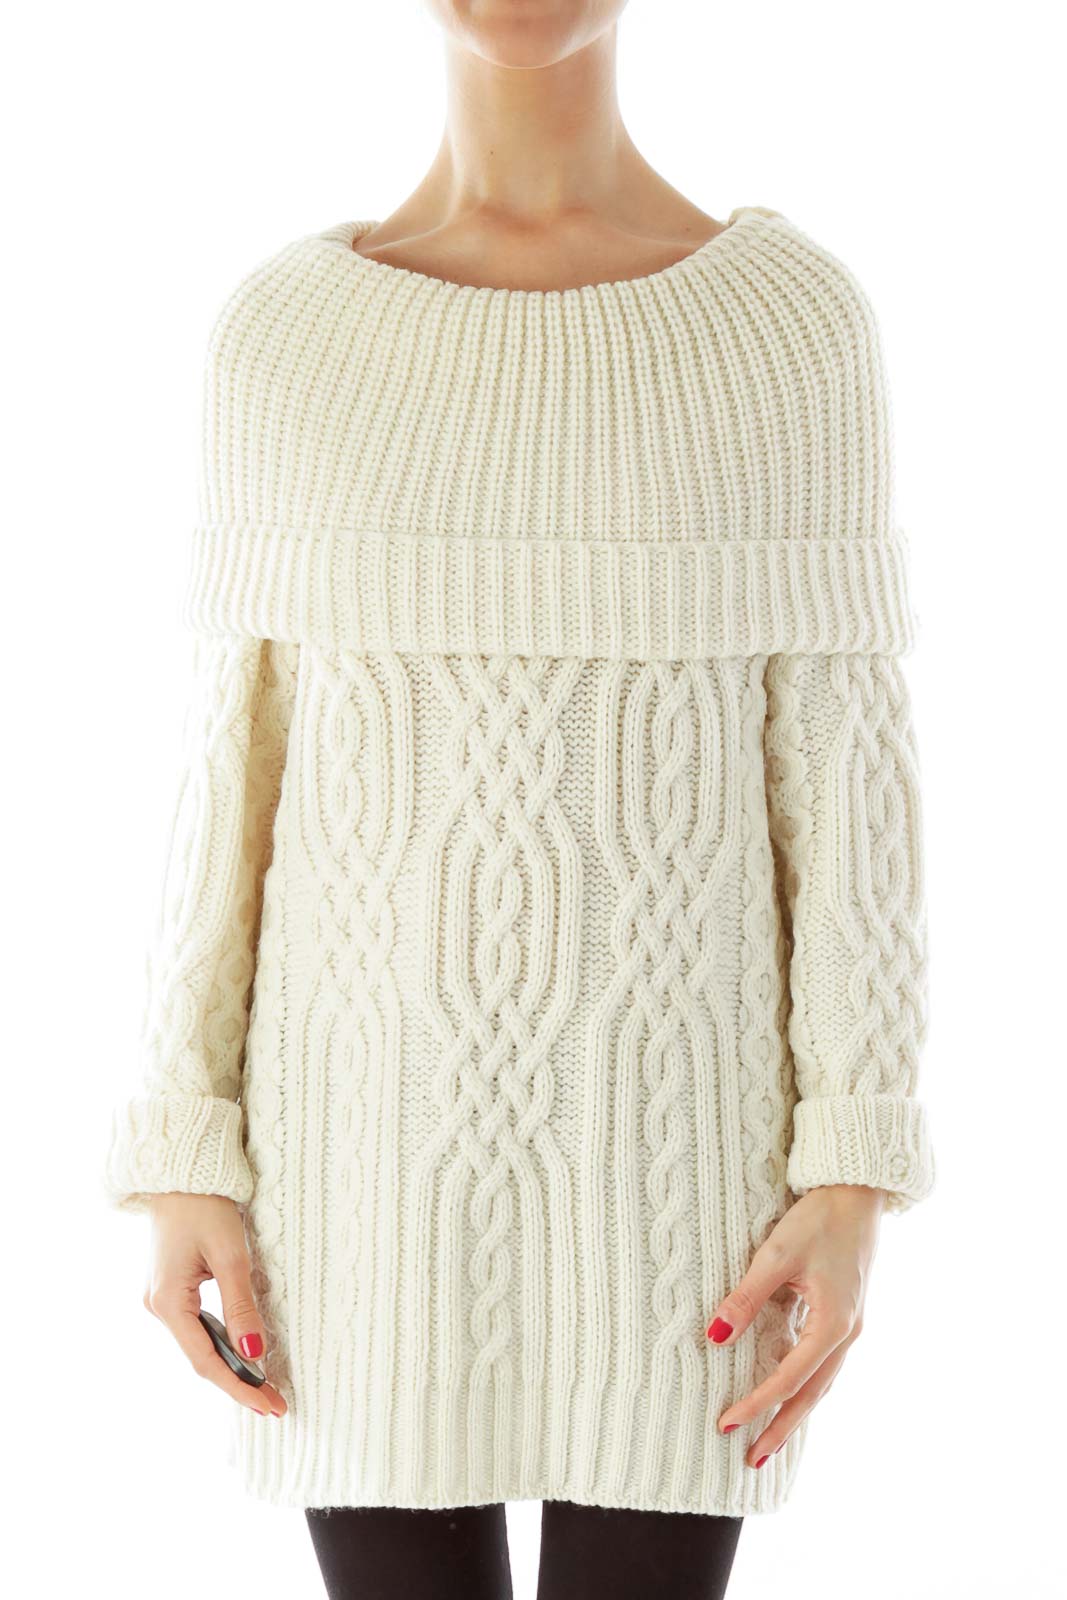 Velnica - mylan Eco Cashmere Knit Hood | Pearlの+forest-century.com.tw